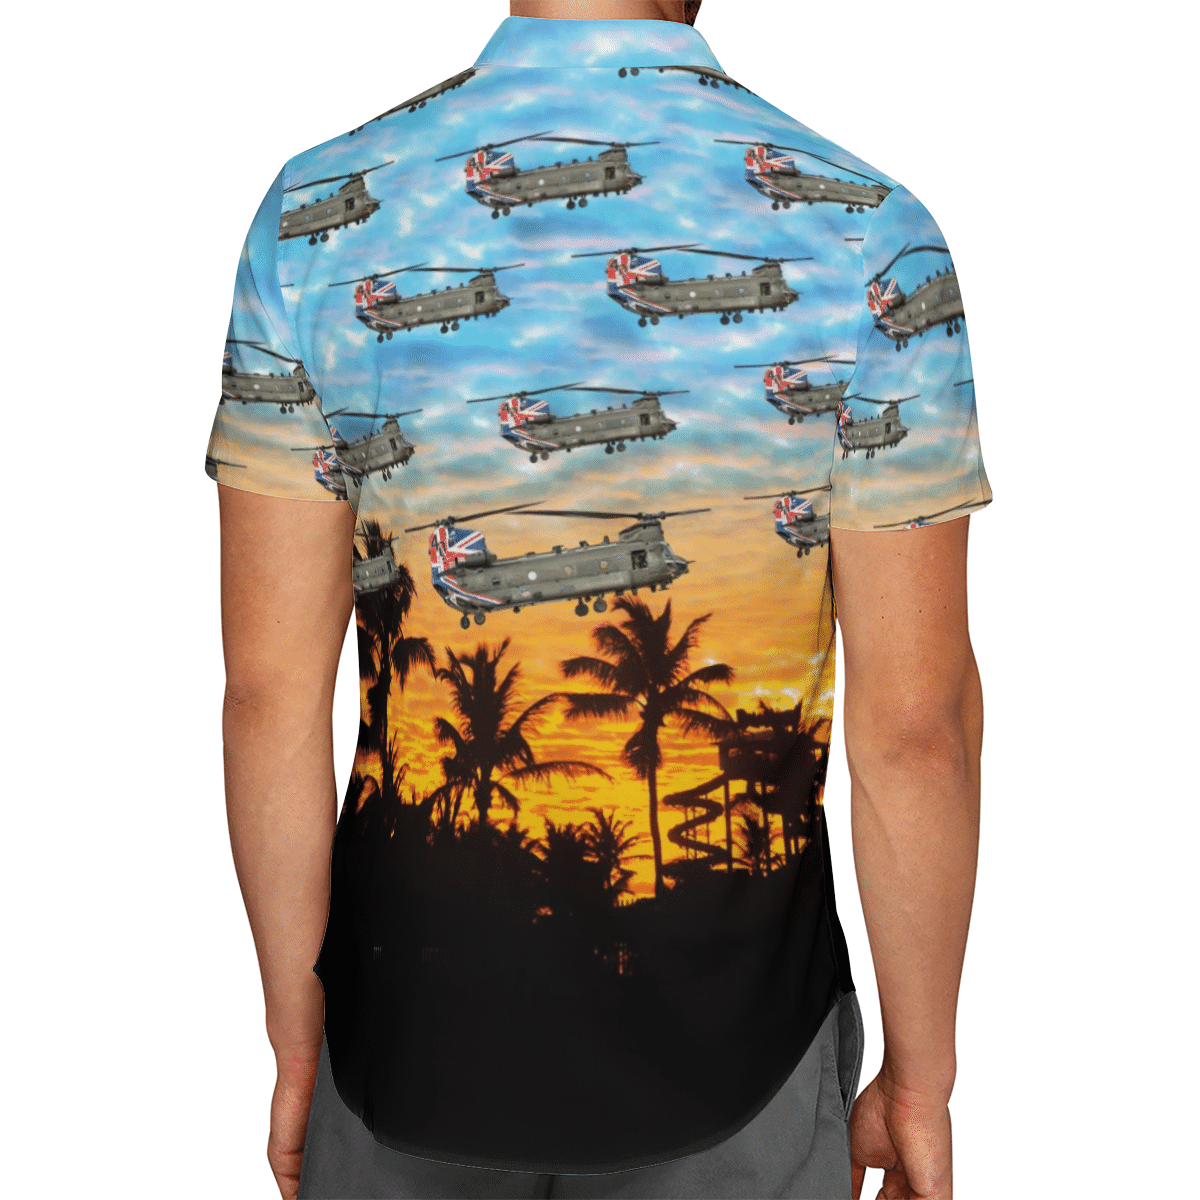 Going to the beach with a quality shirt 175